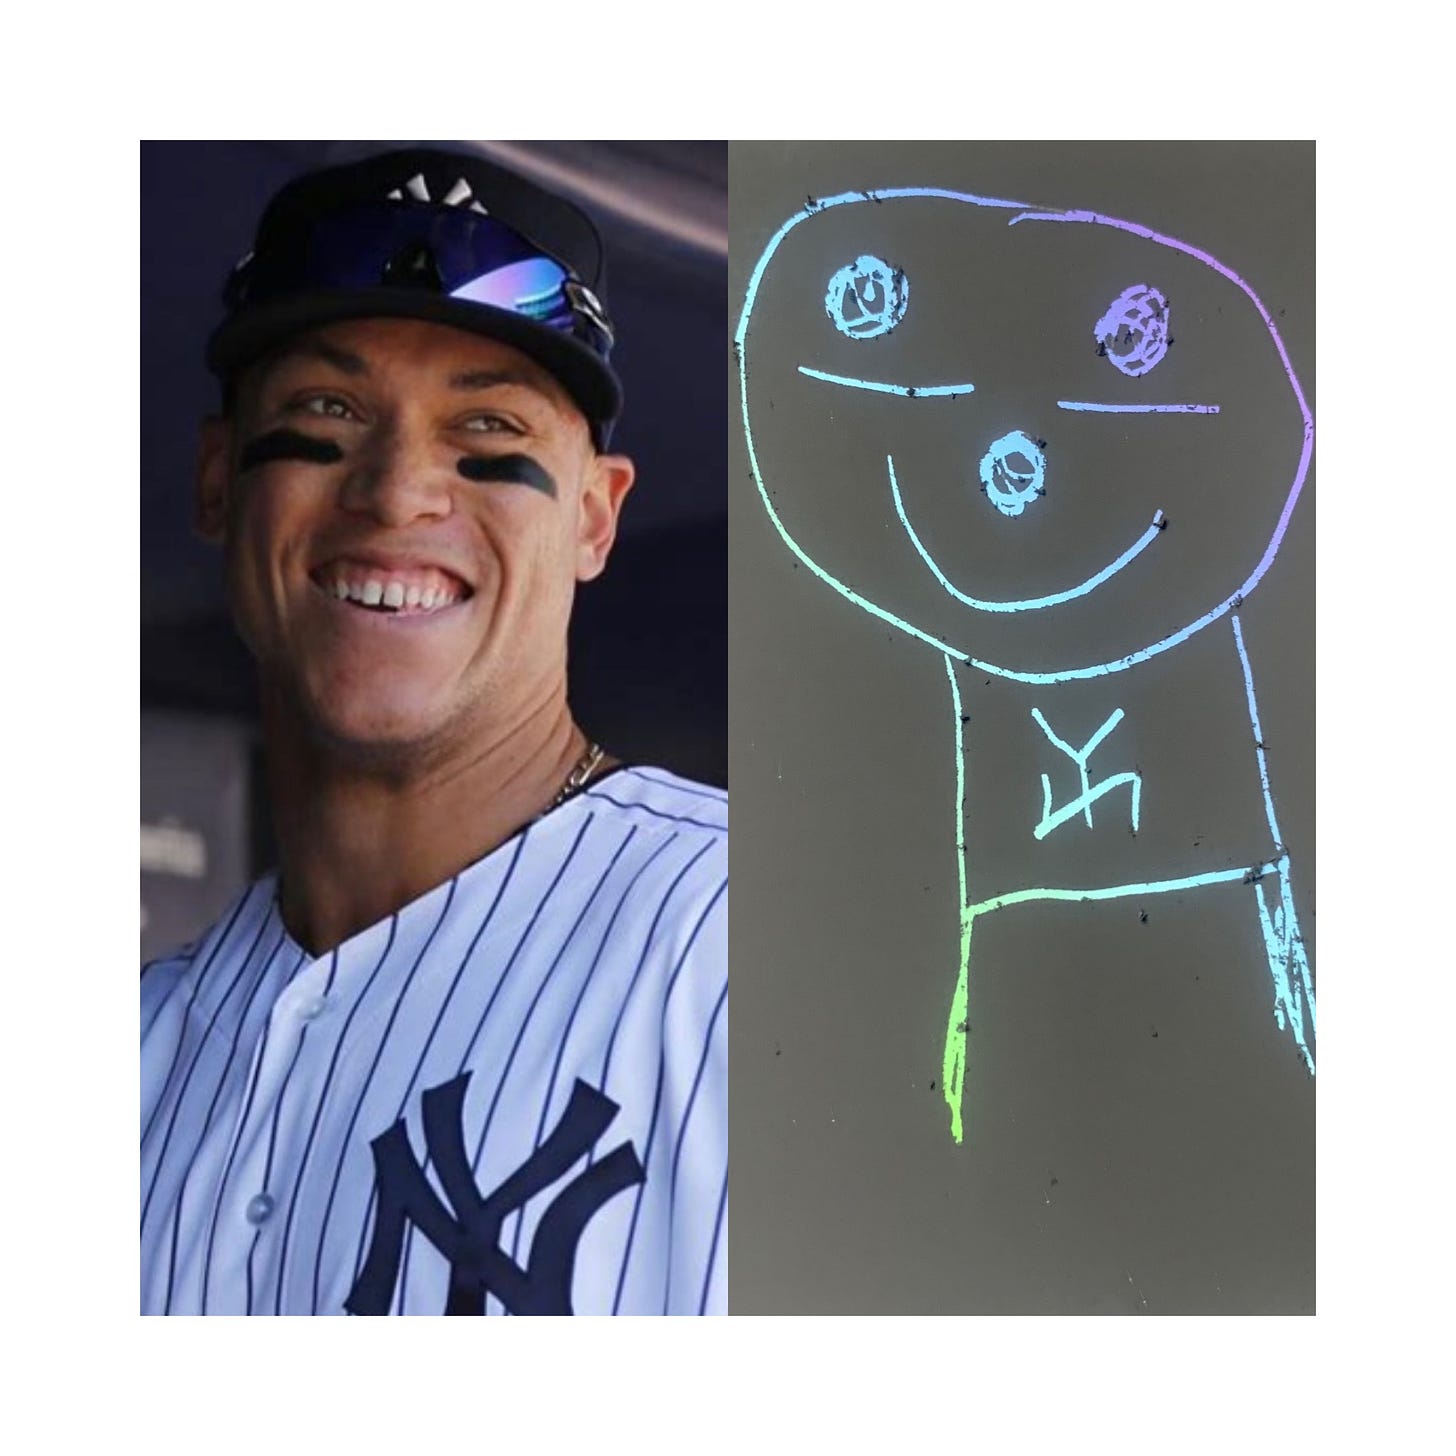 left: aaron Judge, right: a stick drawing of aaron judge